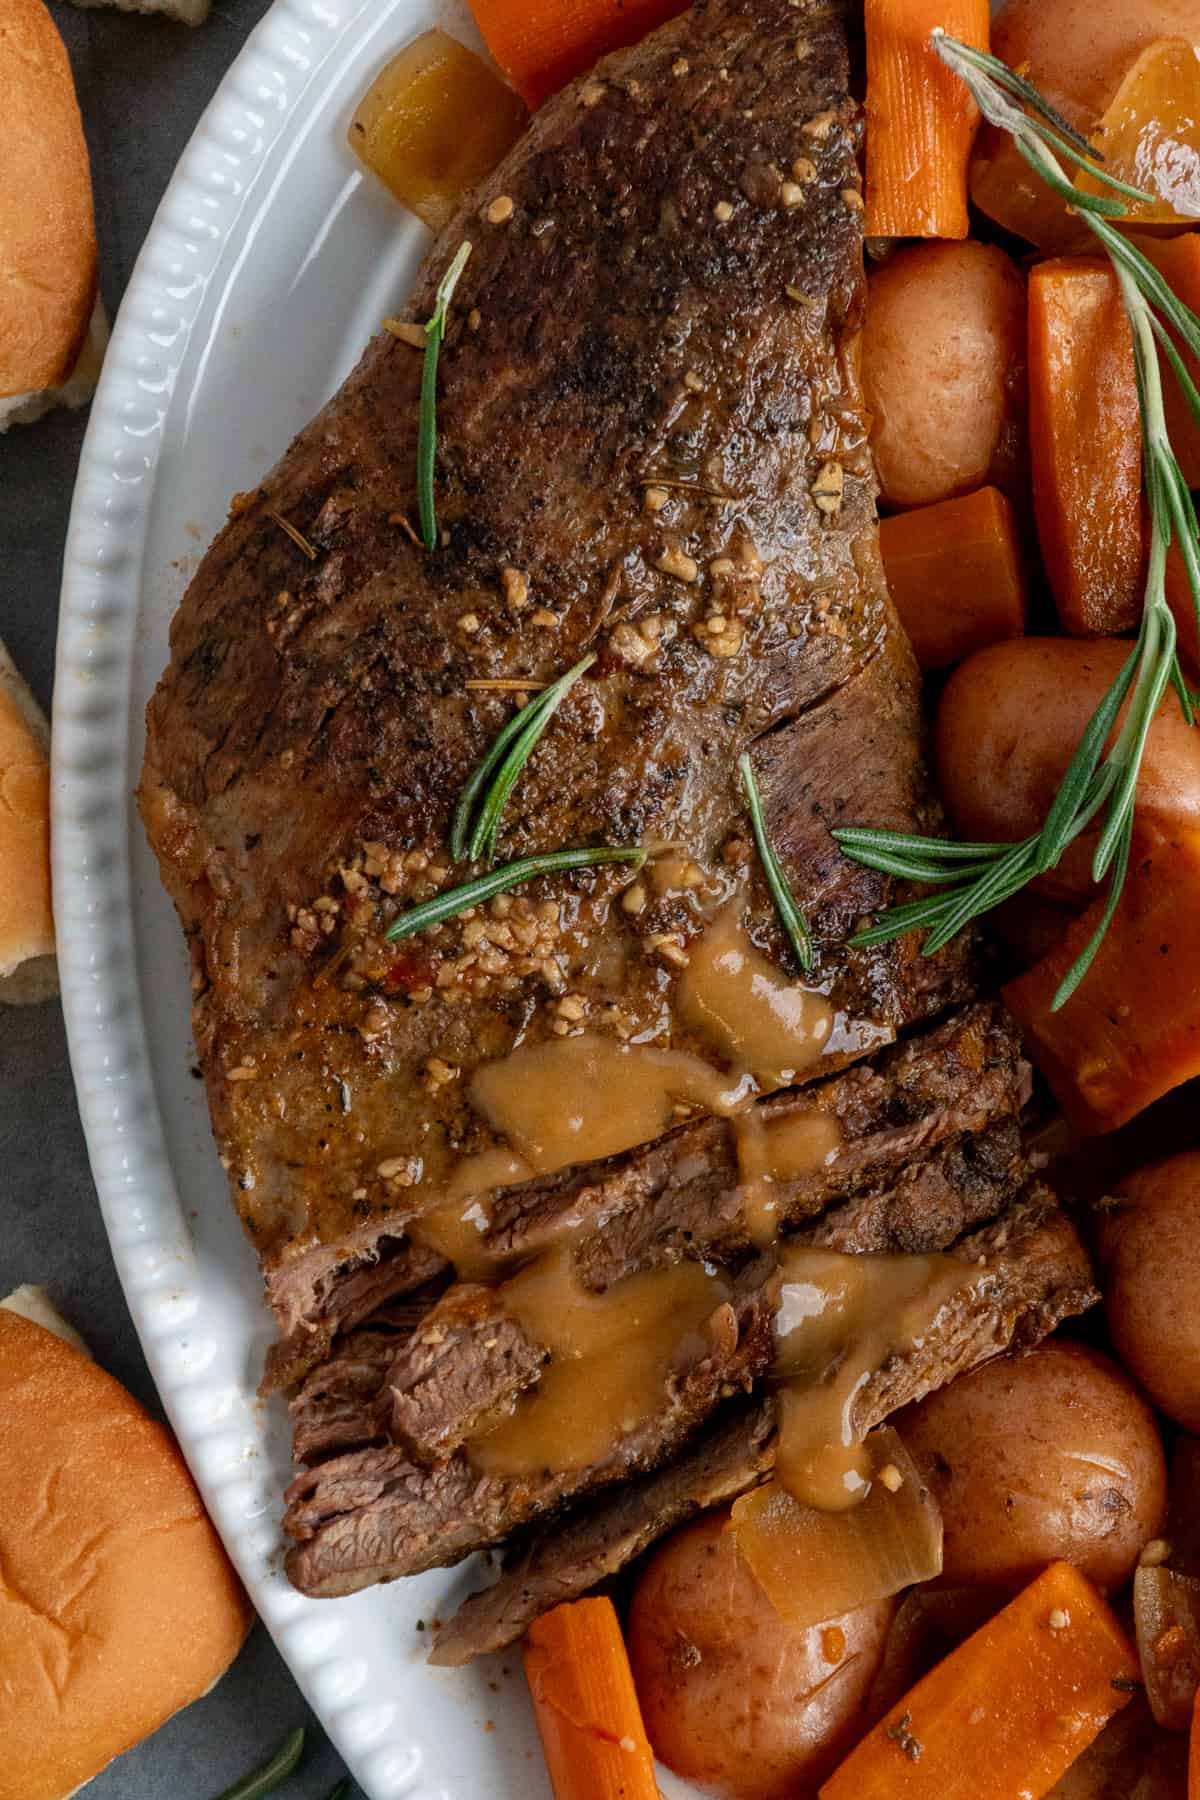 Tri tip roast on a serving platter with carrots and potatoes.